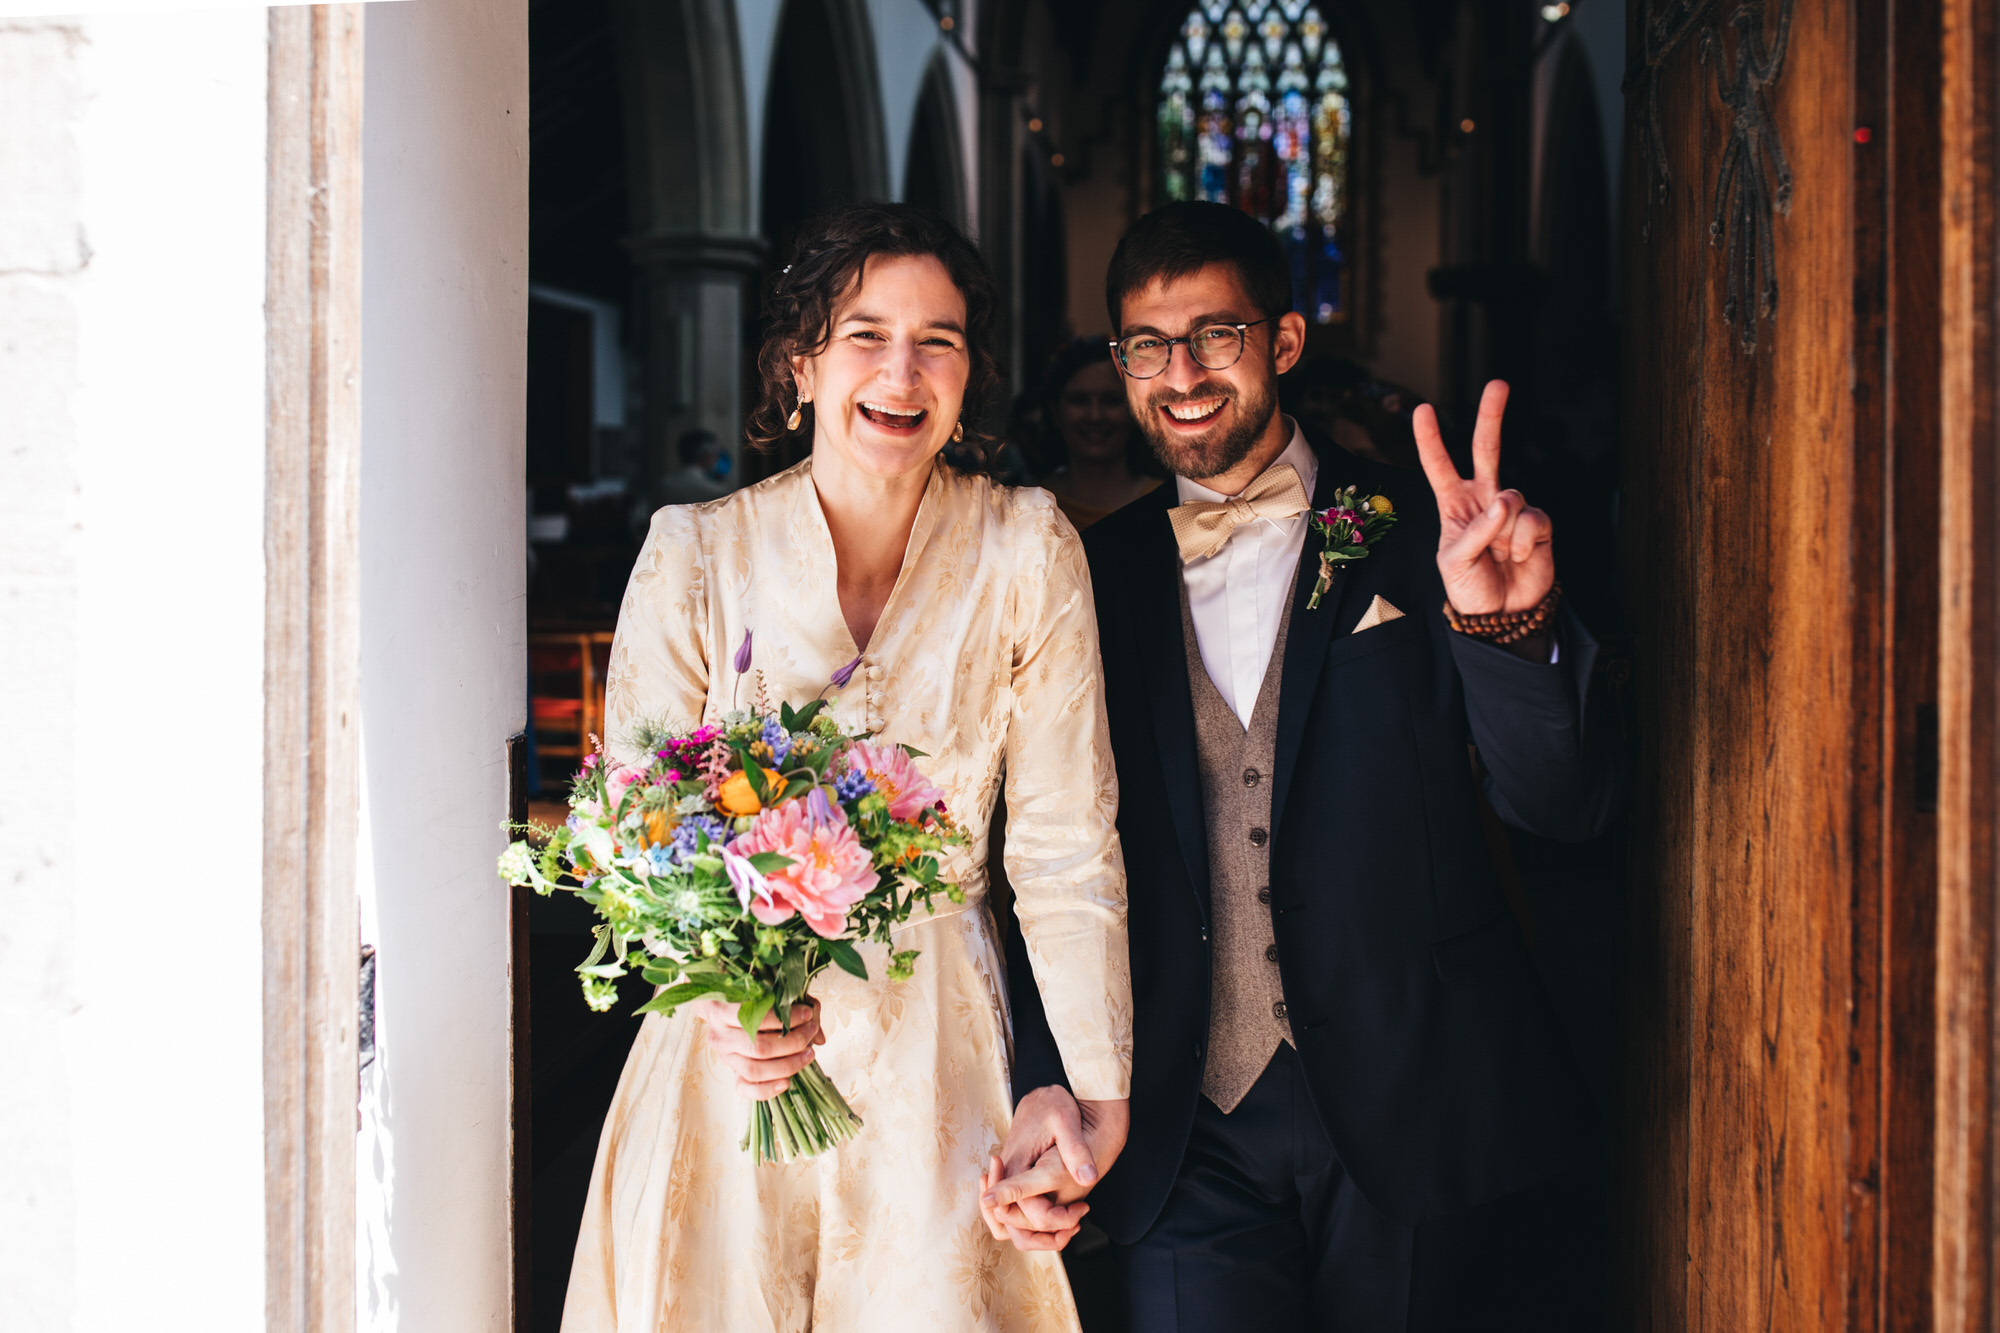 groom gestures peace symbol as the couple leave the church